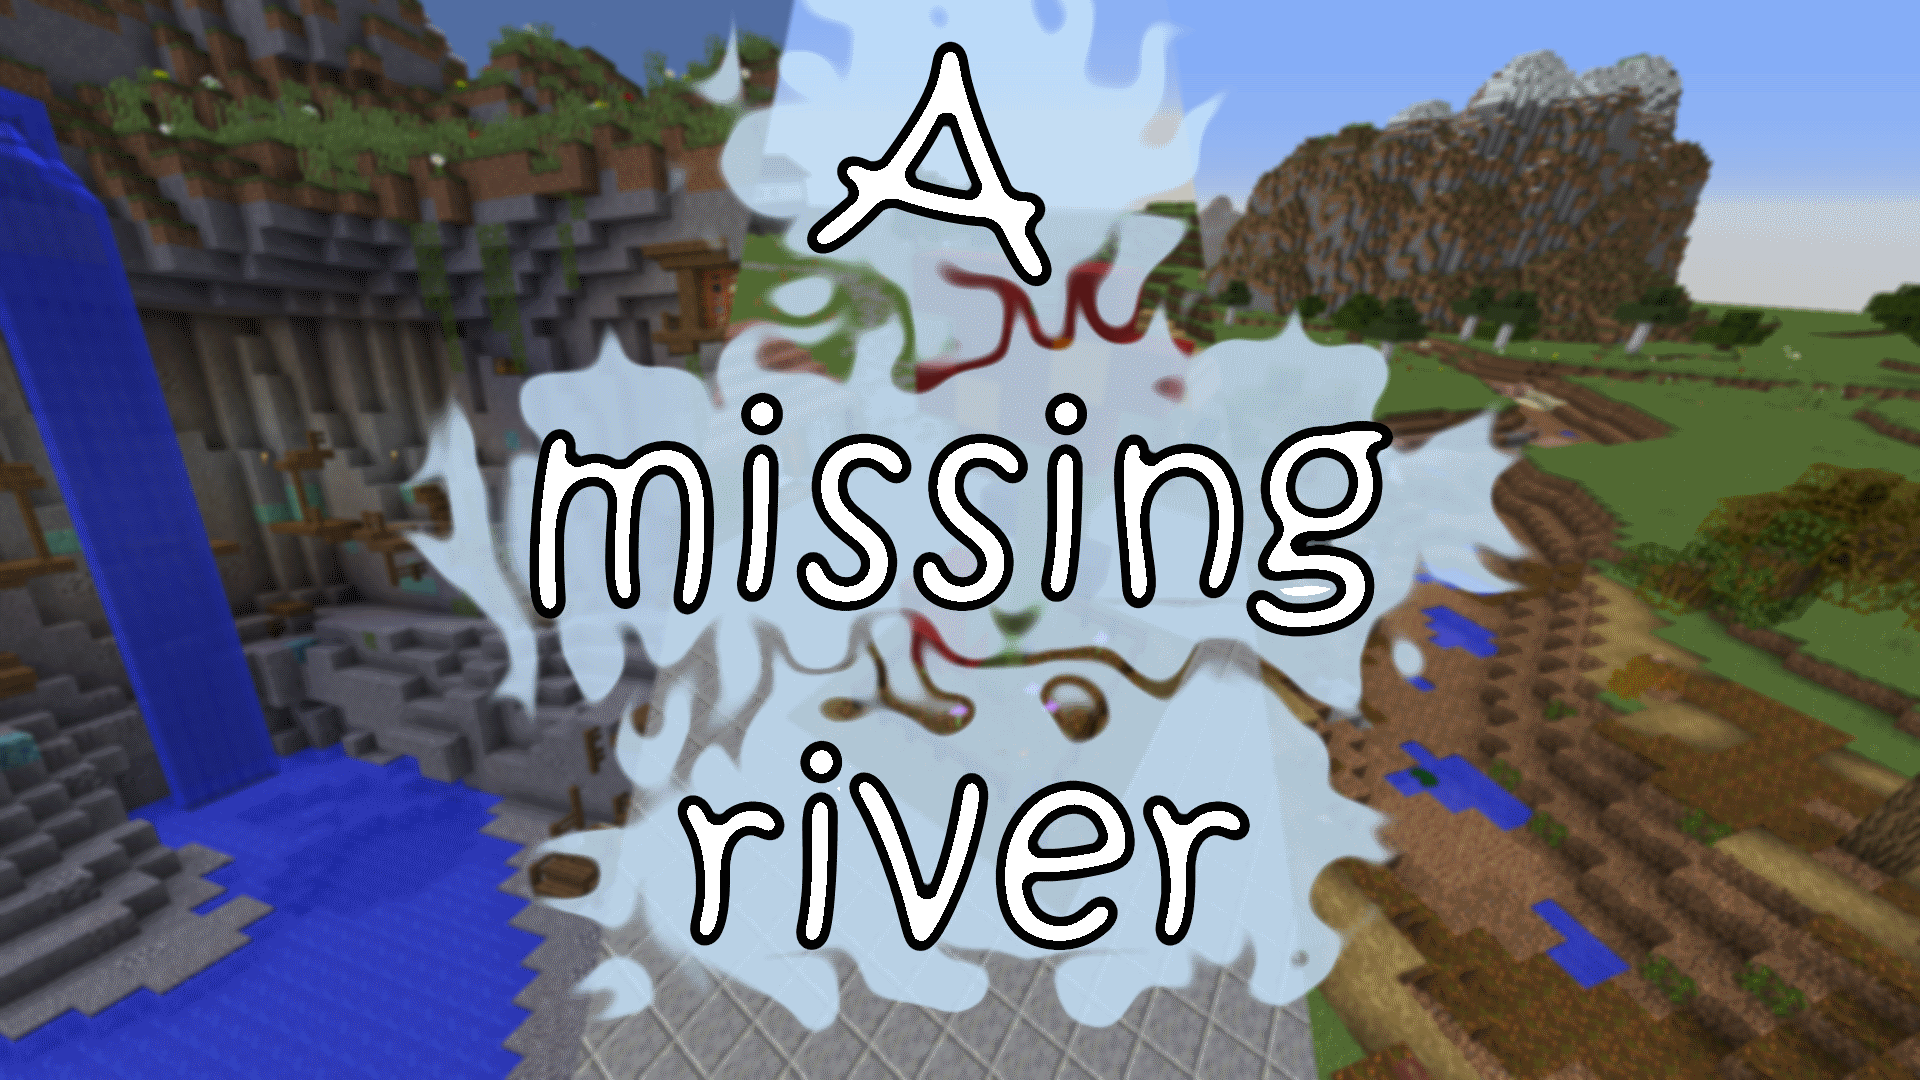 Download A Missing River for Minecraft 1.12.2